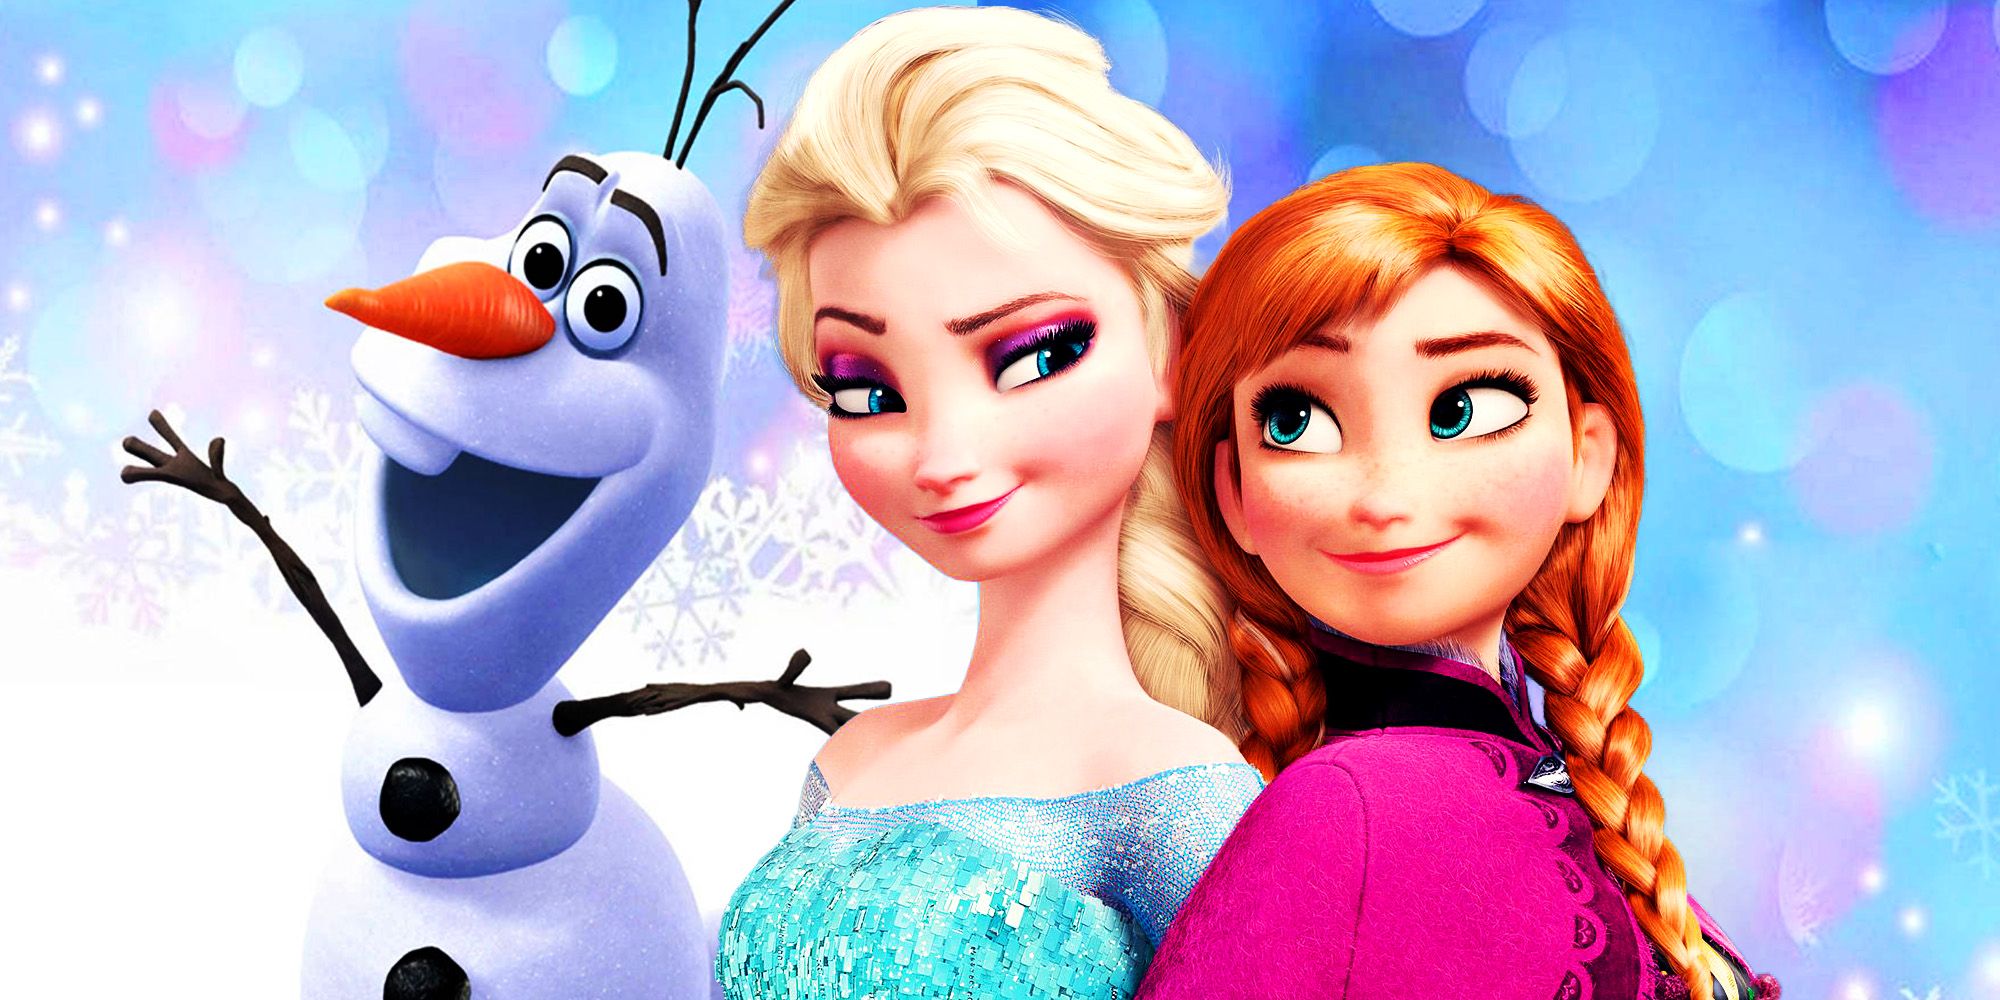 FROZEN 3 (2025) Movie Preview 